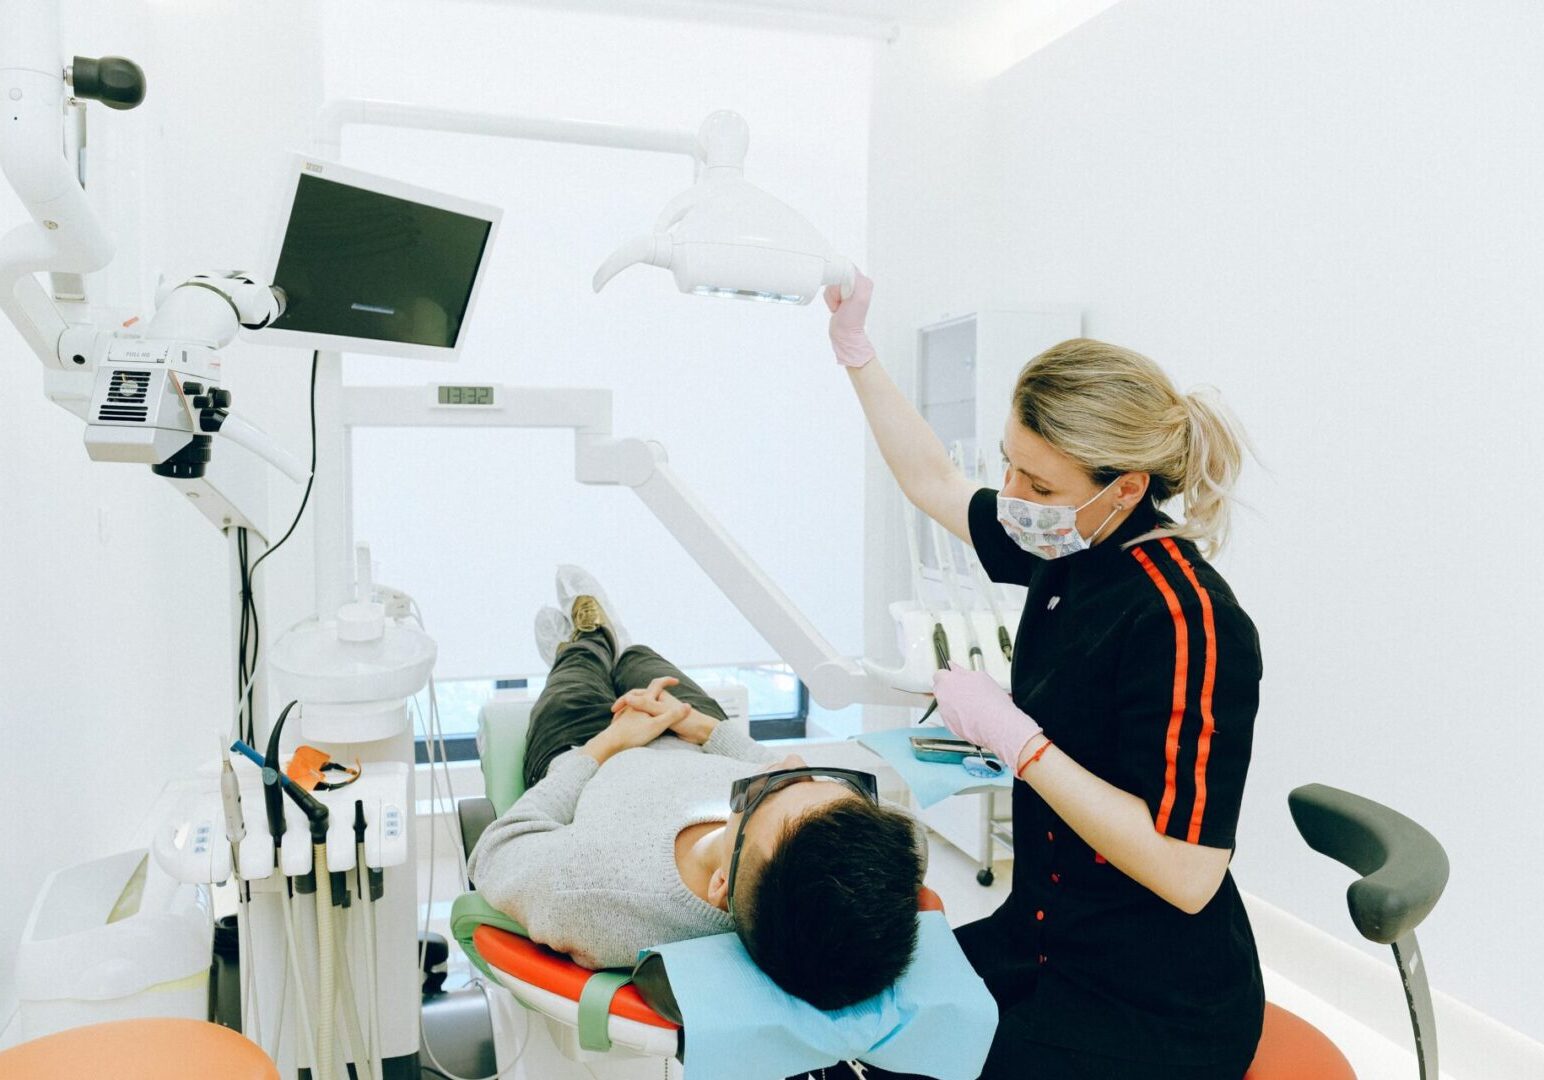 A woman is standing over a man in the dentist 's chair.